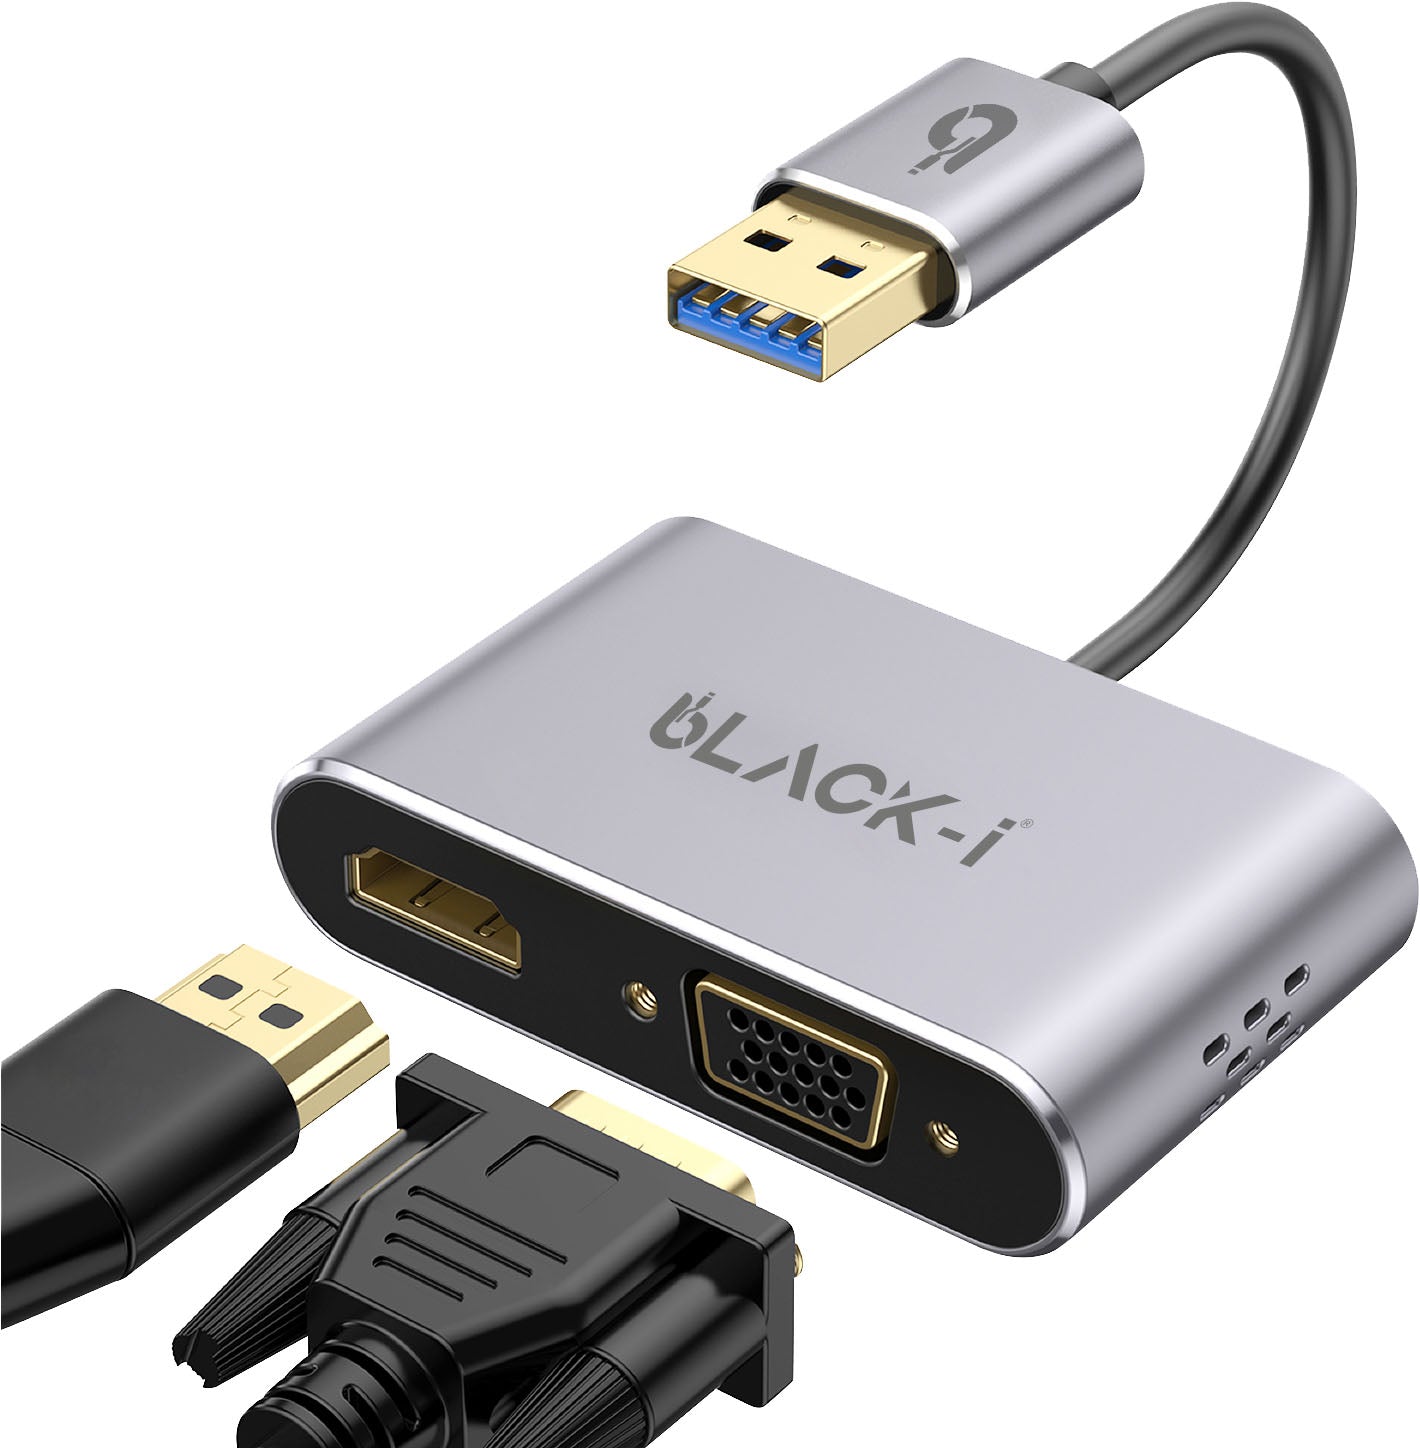 Black-i USB 3.0 to HDMI & VGA Converter – Dual Display Connectivity for Versatile Visual Expansion and Enhanced Productivity